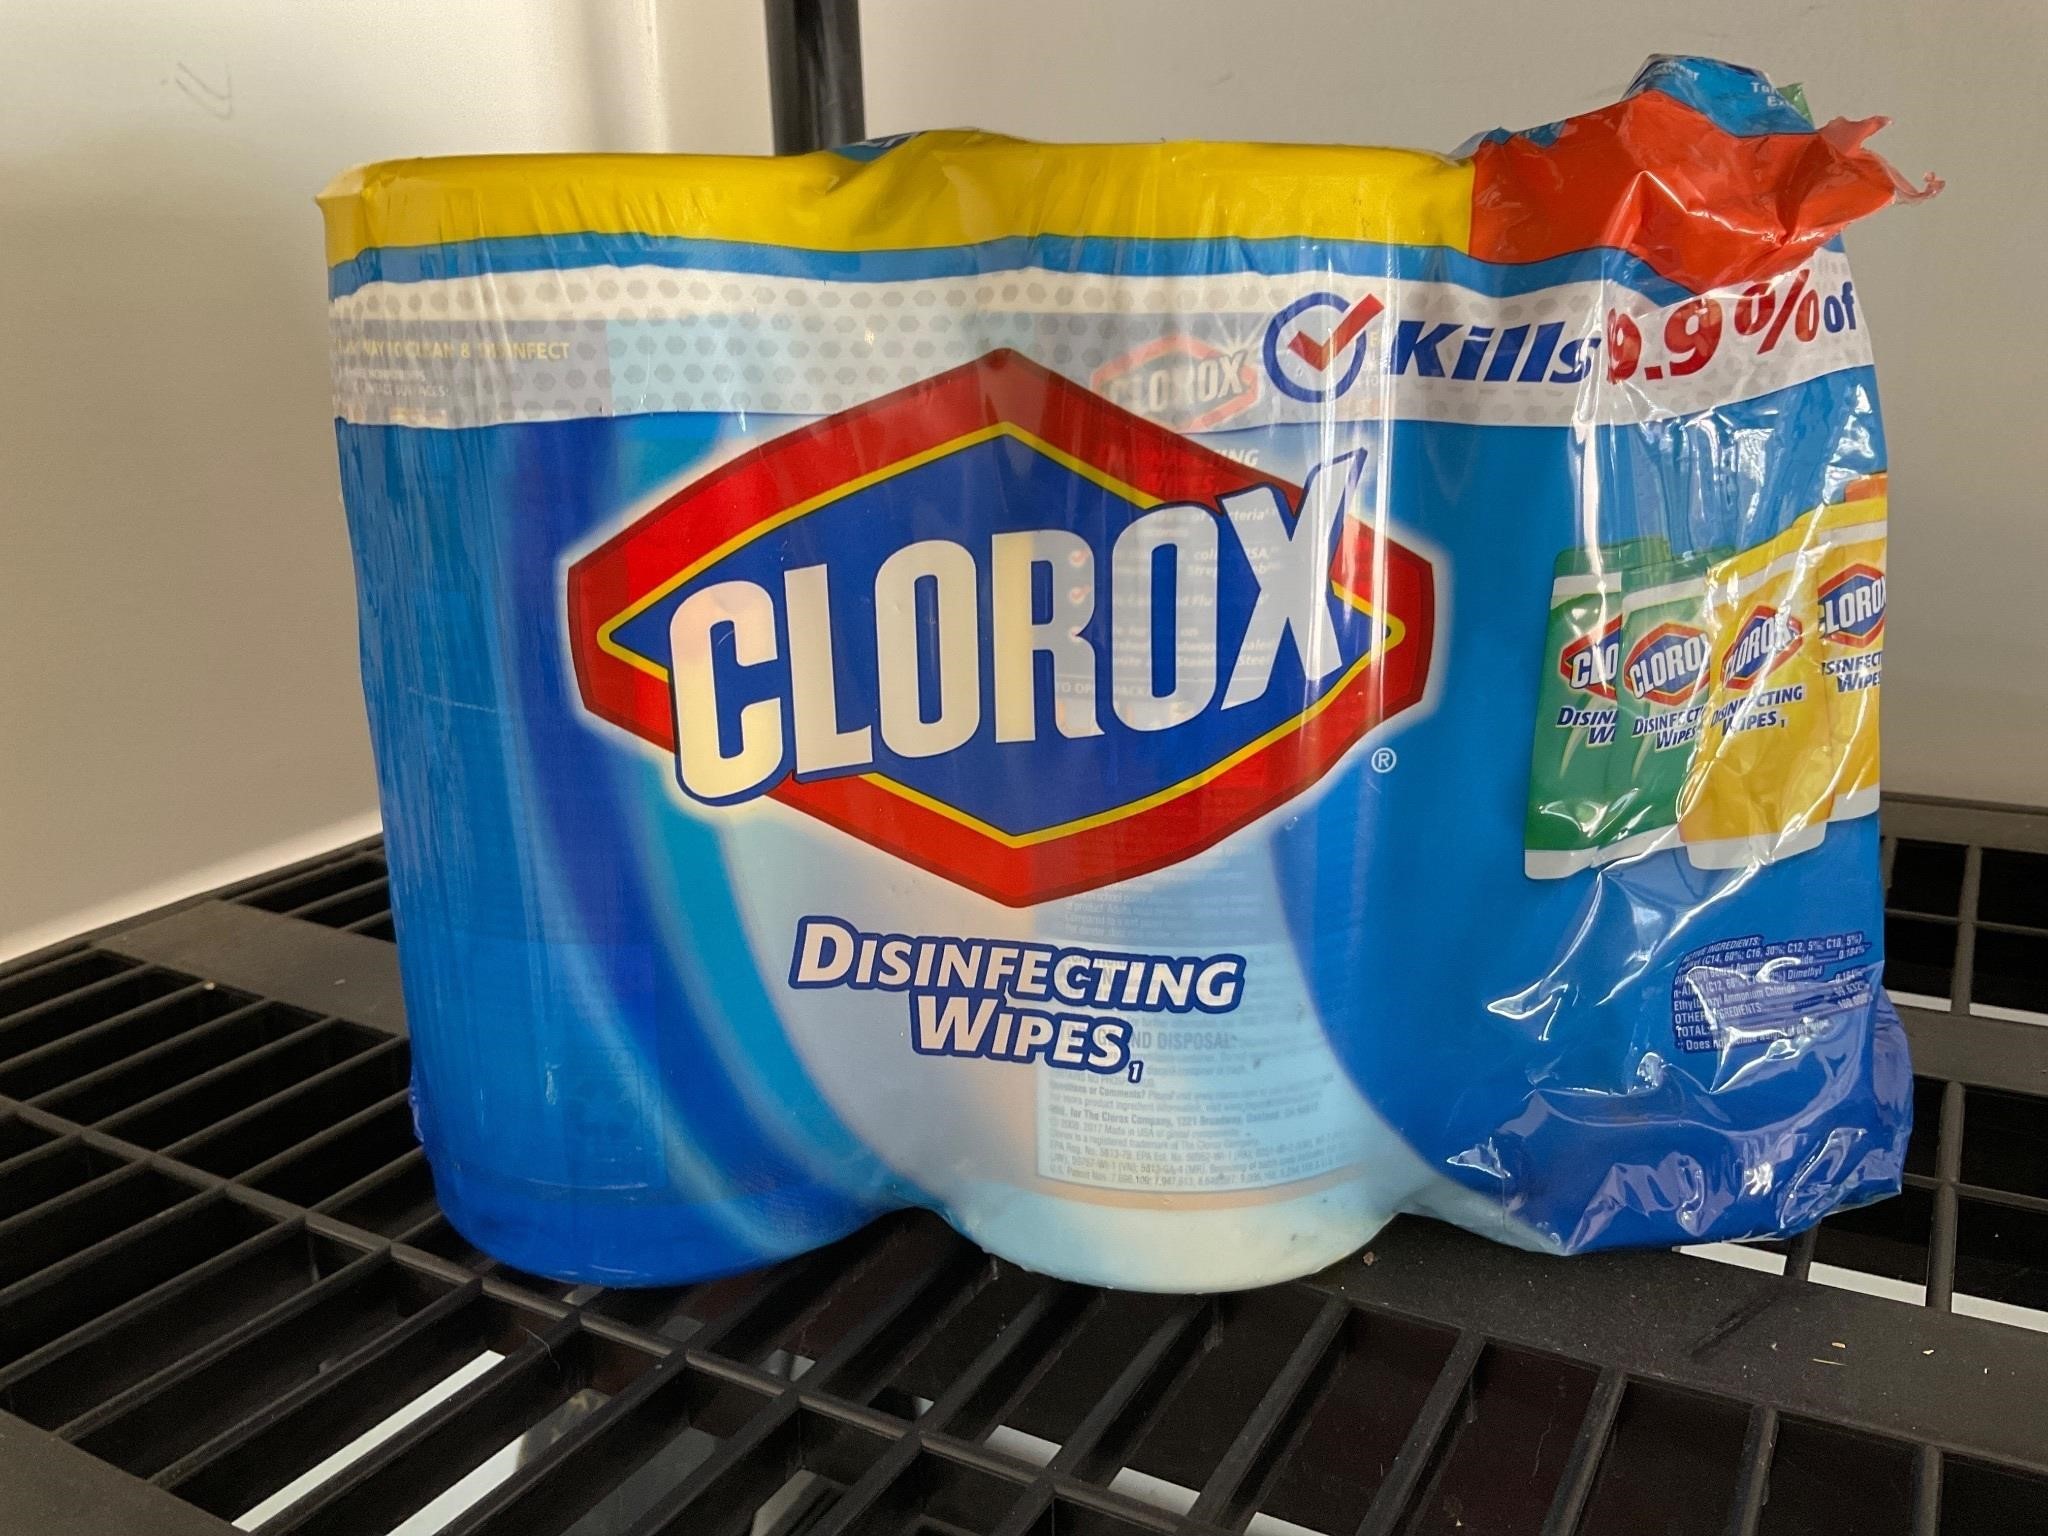 DISINFECTING WIPES BY CLOROX